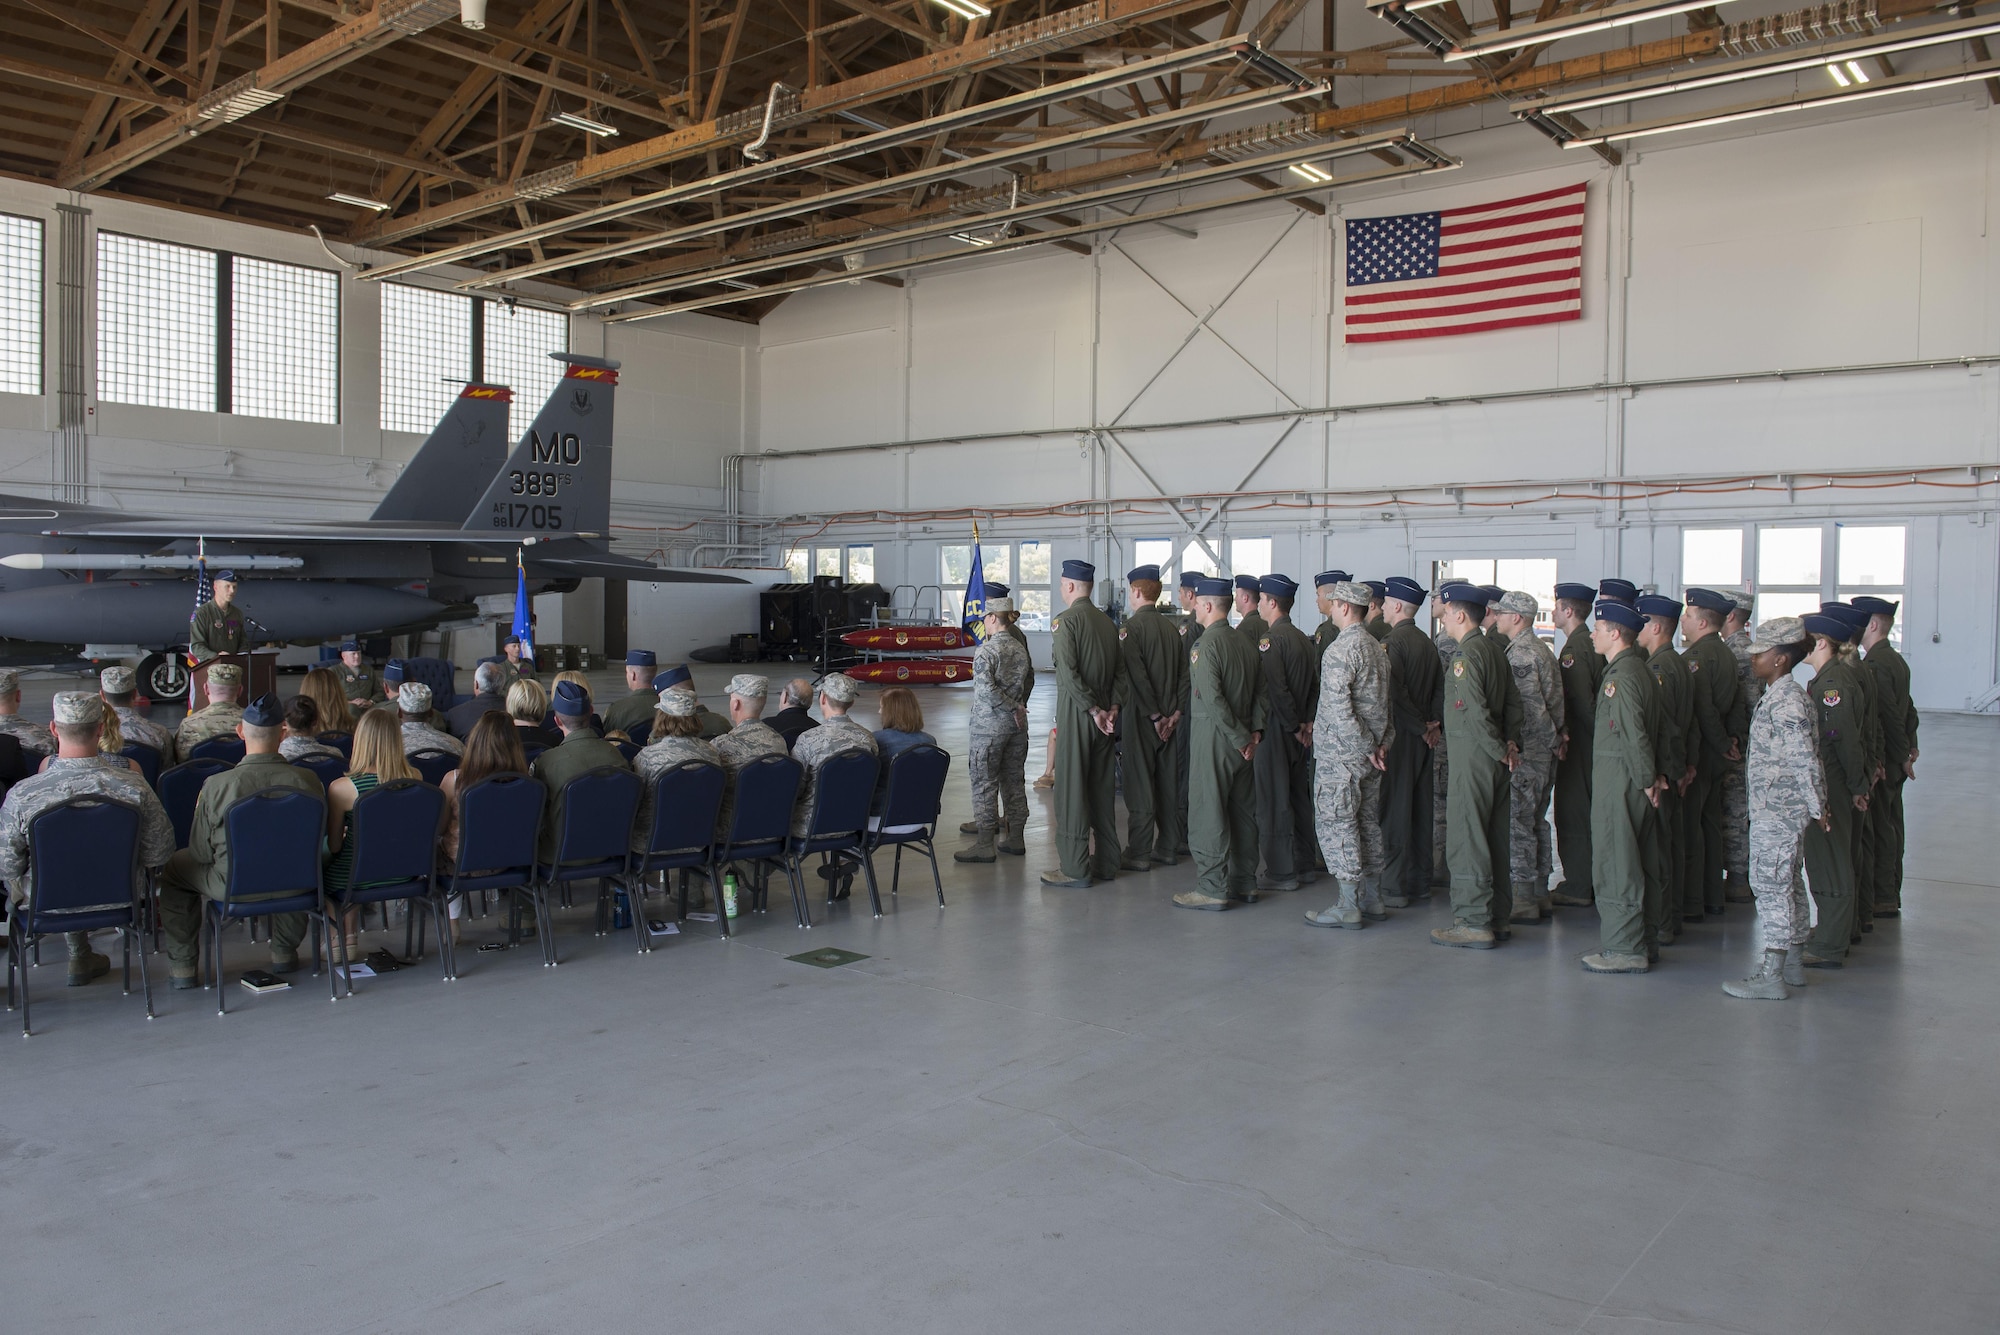 Lt Col. Gary Marlowe addresses the 389th Fighter Squadron at his change of command ceremony May 22, 2017, at Mountain Home Air Force Base, Idaho. Marlowe was the commander of the T-Bolts for two years before passing command to Lt Col. David Och. (U.S. Air Force photo by Airman 1st Class Jeremy D. Wolff/Released)